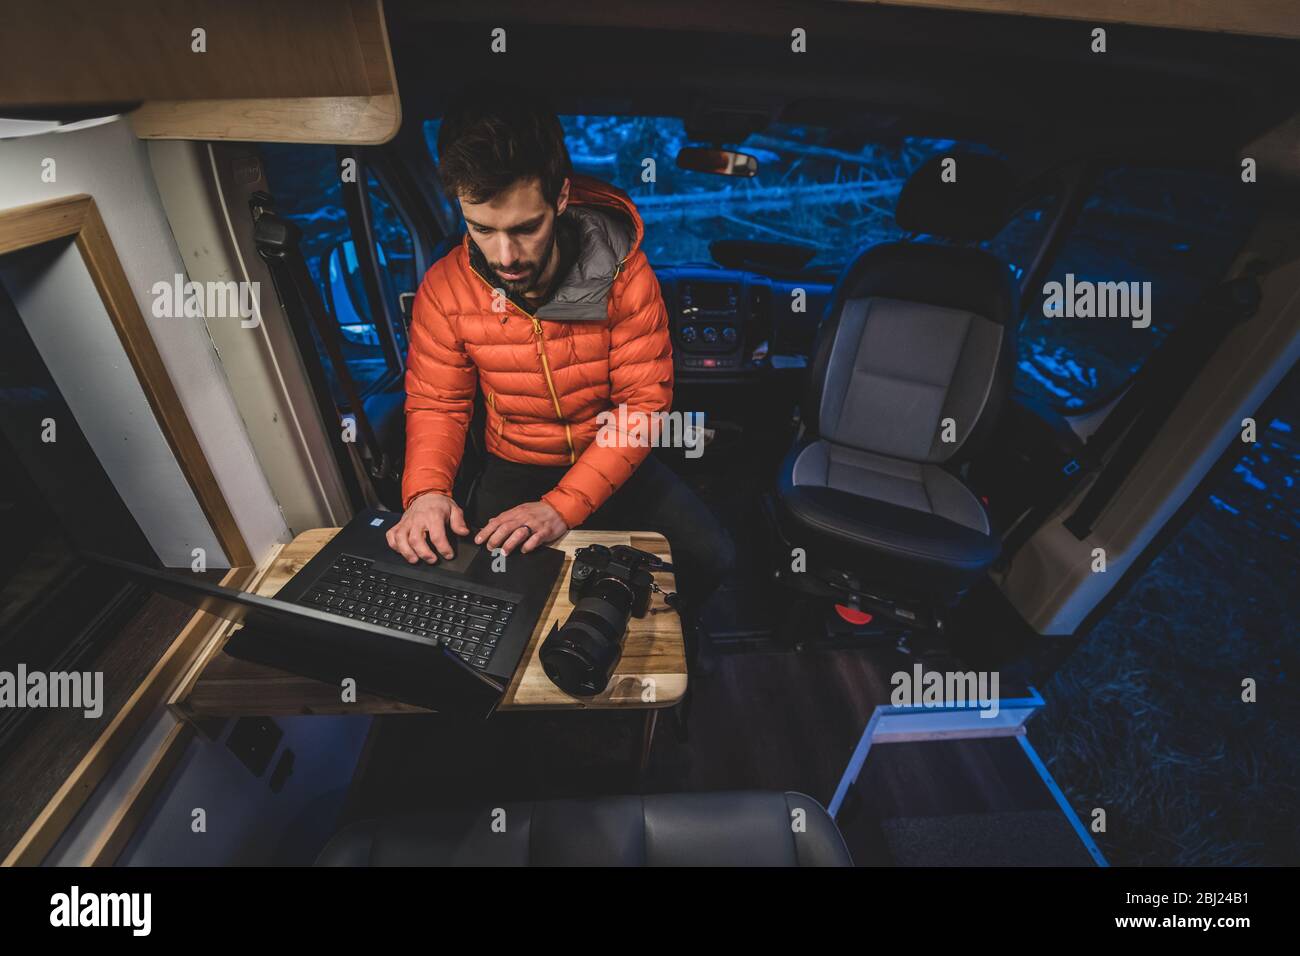 A man sitting at a wooden table in his campervan working on his laptop. Stock Photo